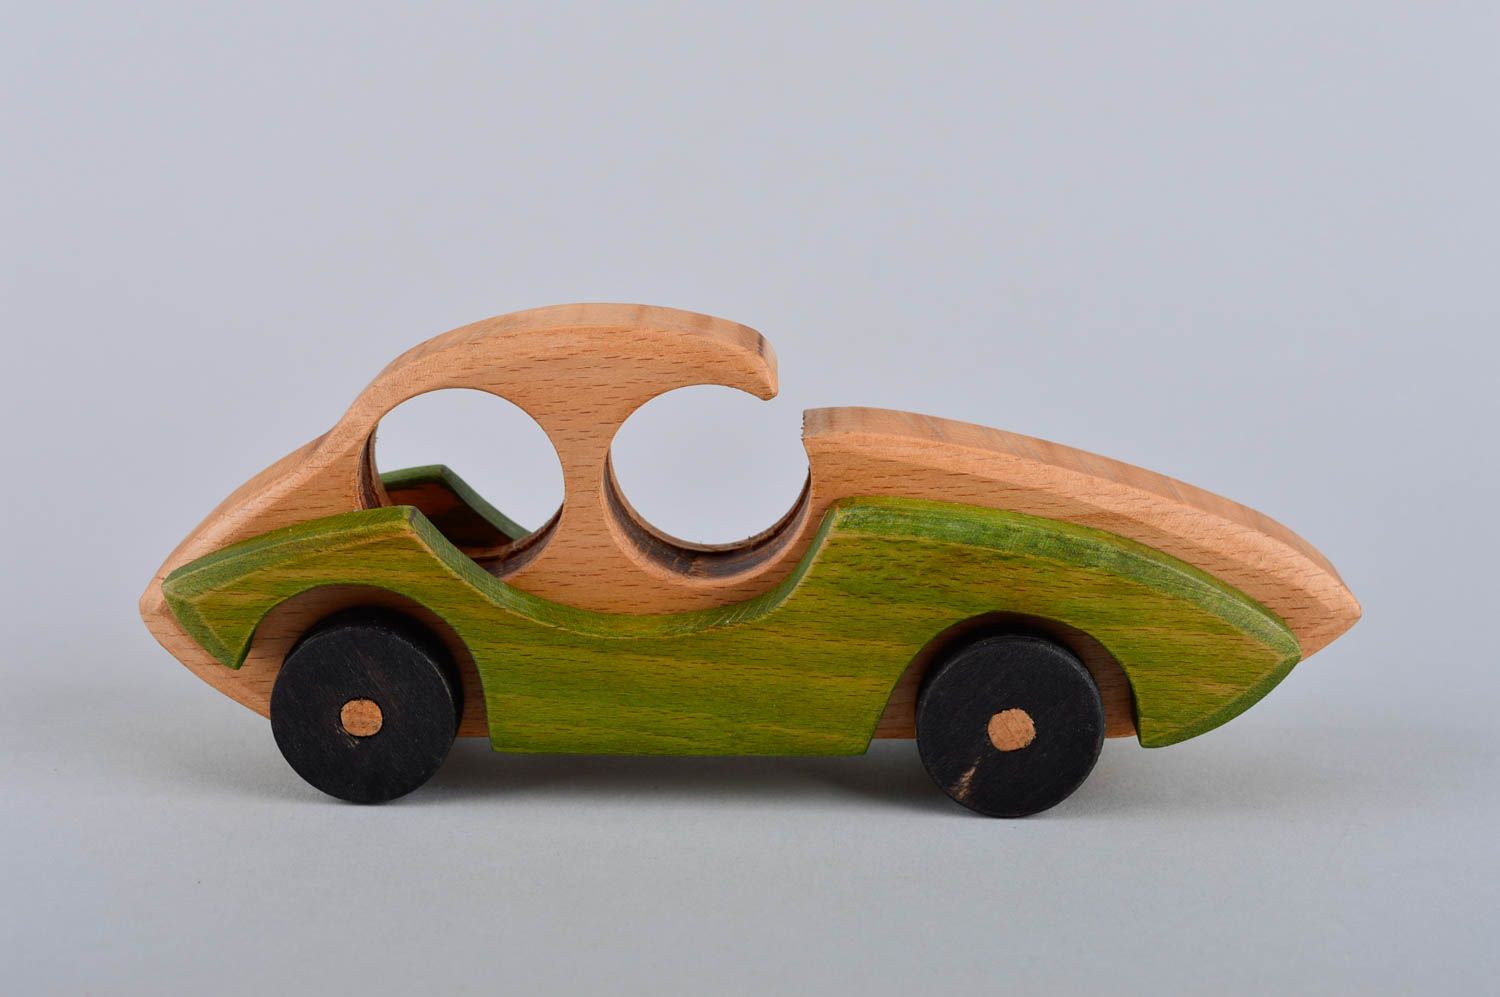 Wooden toy unusual toy for kids designer toy gift ideas nursery decor photo 2